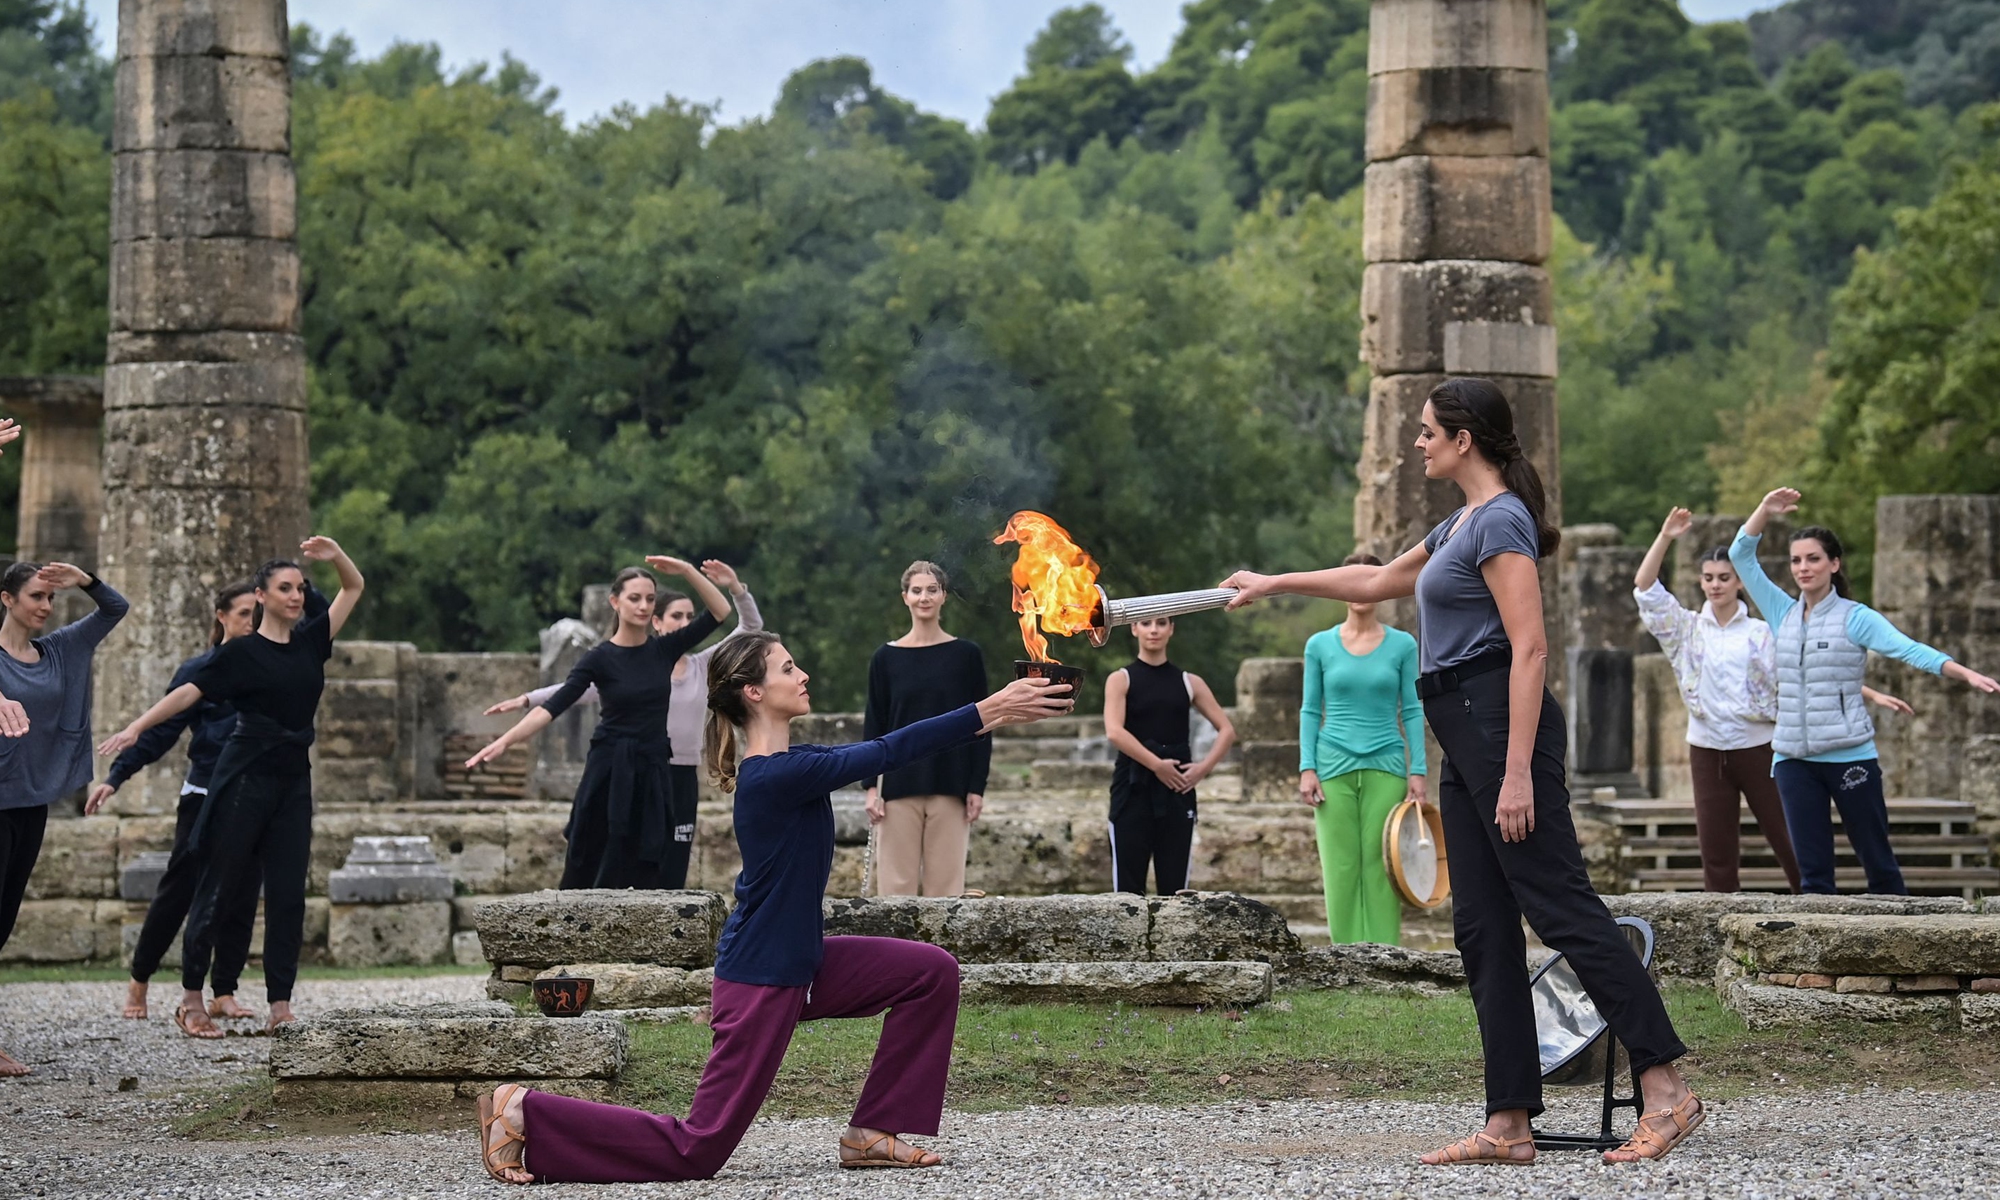 Greek actress Xanthi Georgiou (right), playing the role of the High Priestess, lights the Olympic torch on Sunday during the last rehearsal of the flame lighting ceremony for the Beijing 2022 Winter Olympics at the Ancient Olympia archeological site, birthplace of the ancient Olympics in southern Greece. Photo: VCG